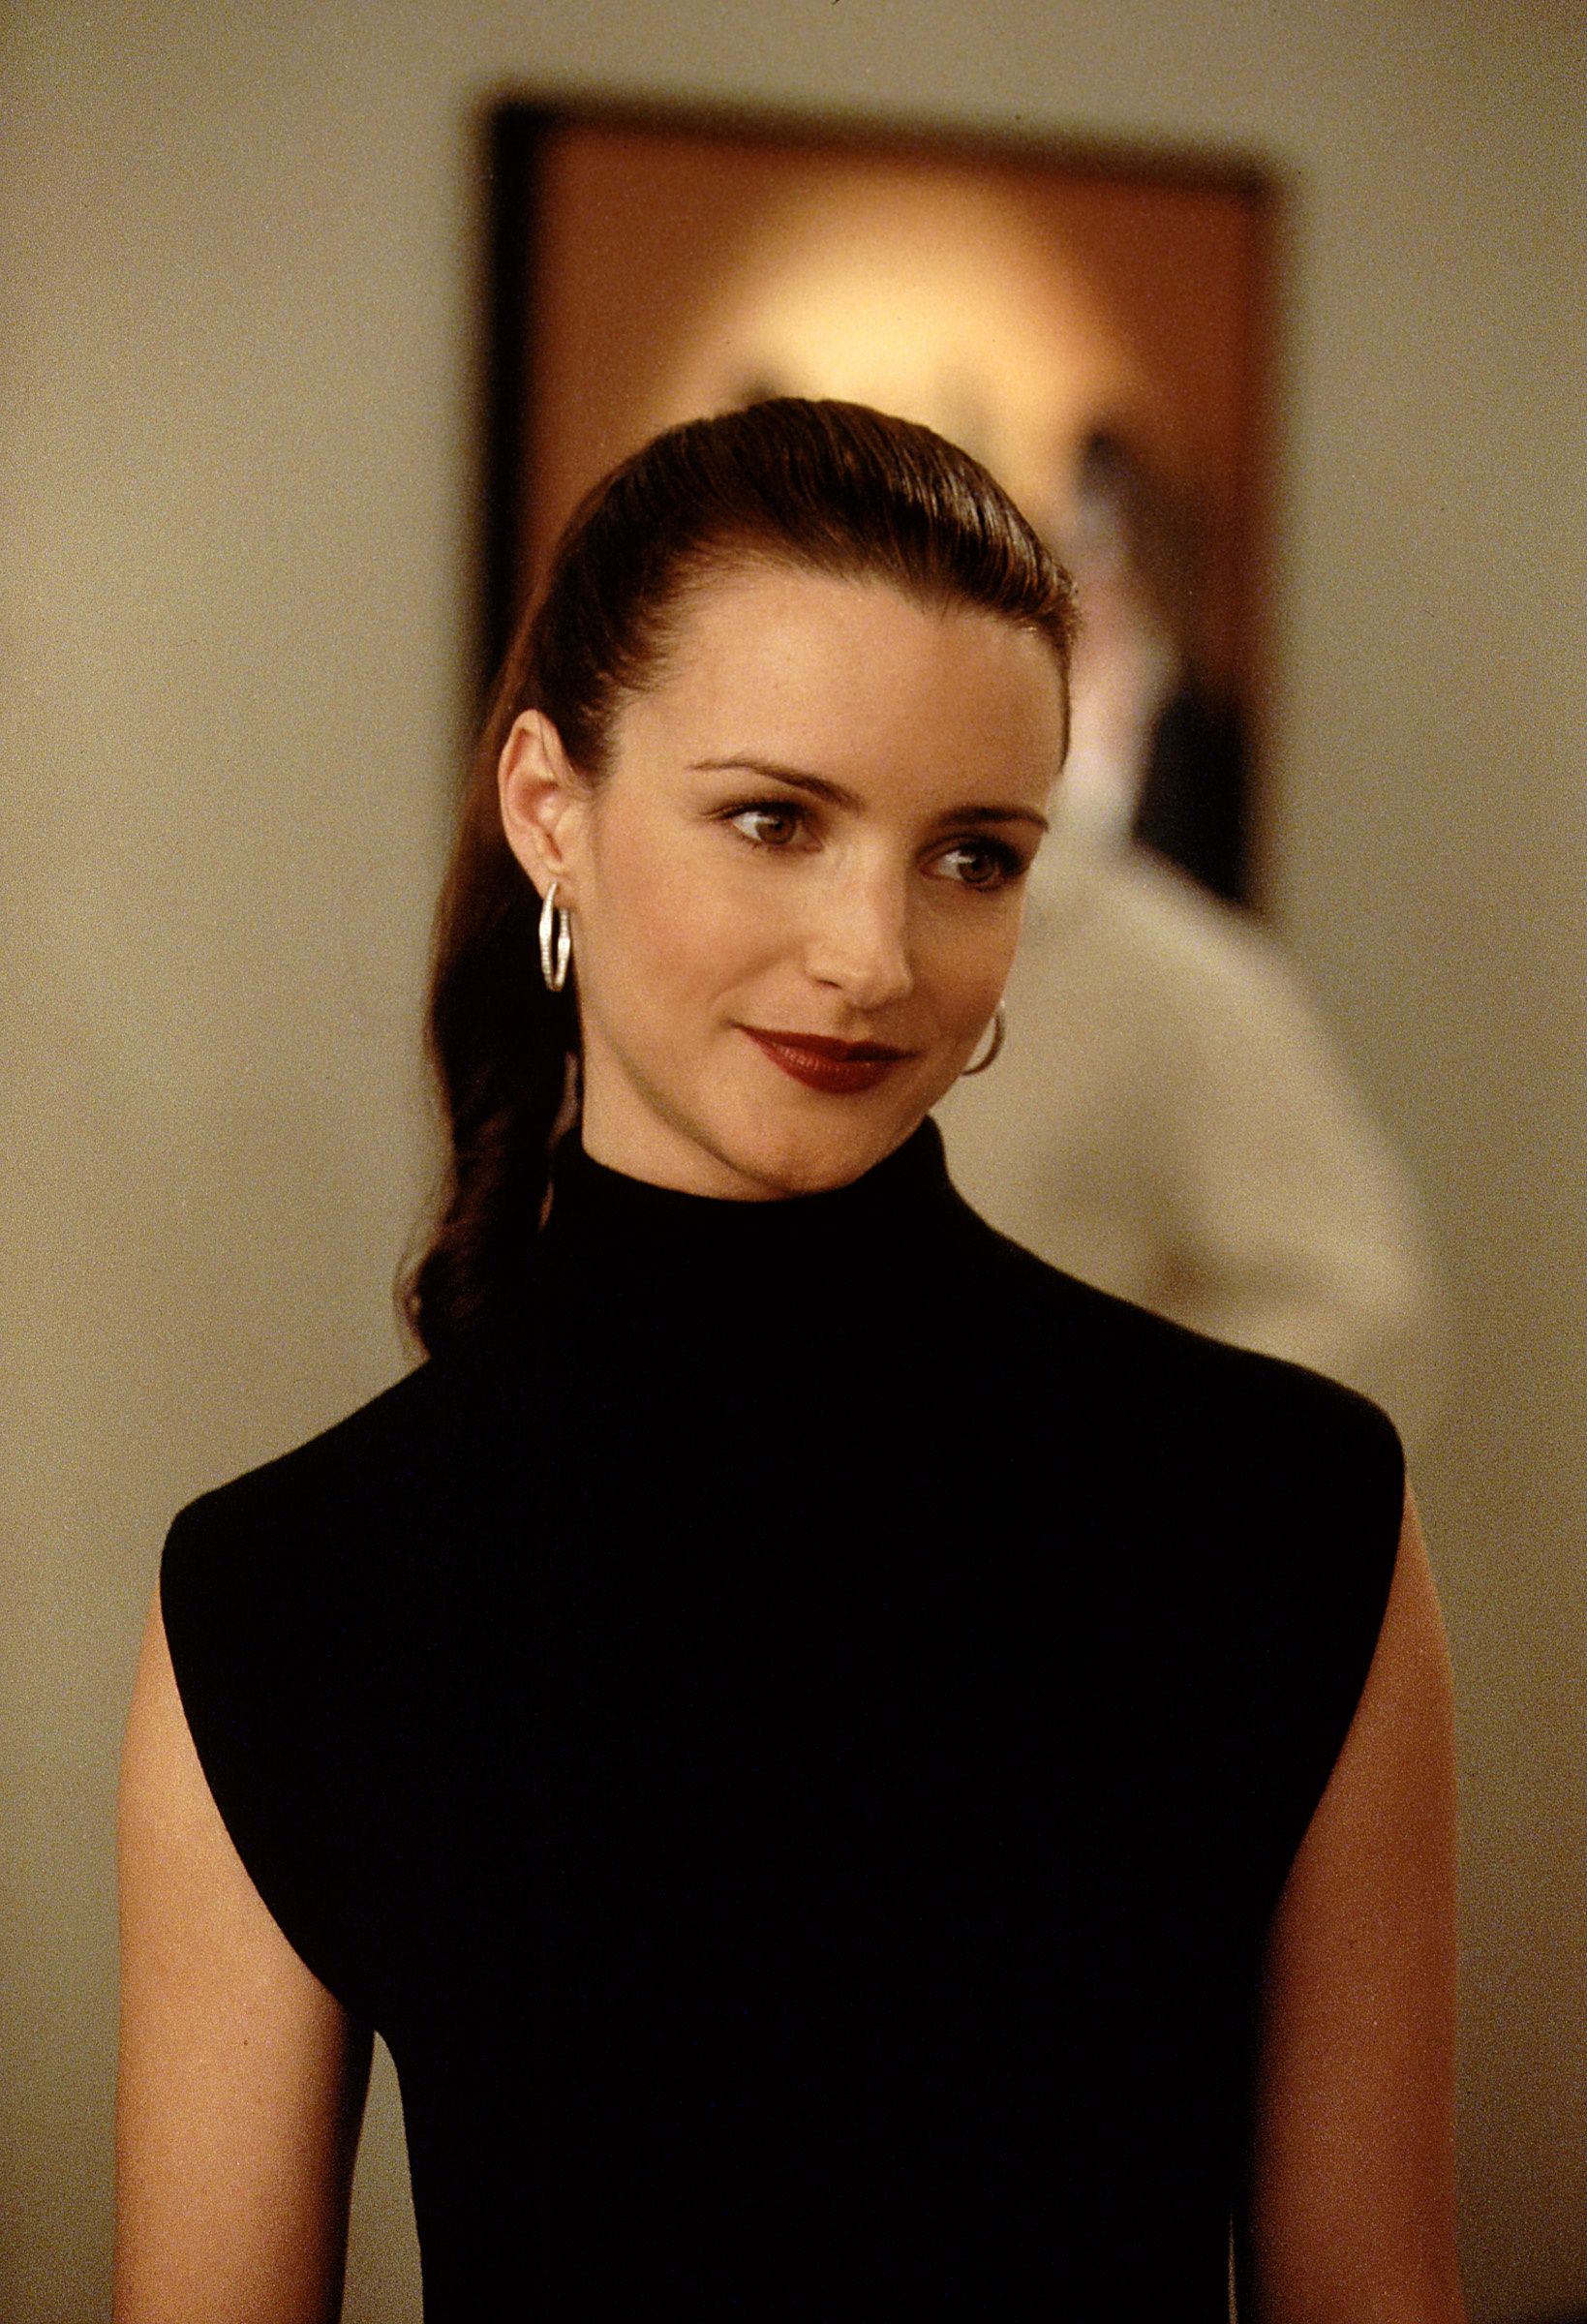 Kristin Davis Stars in "Sex And The City." | Source: Getty Images